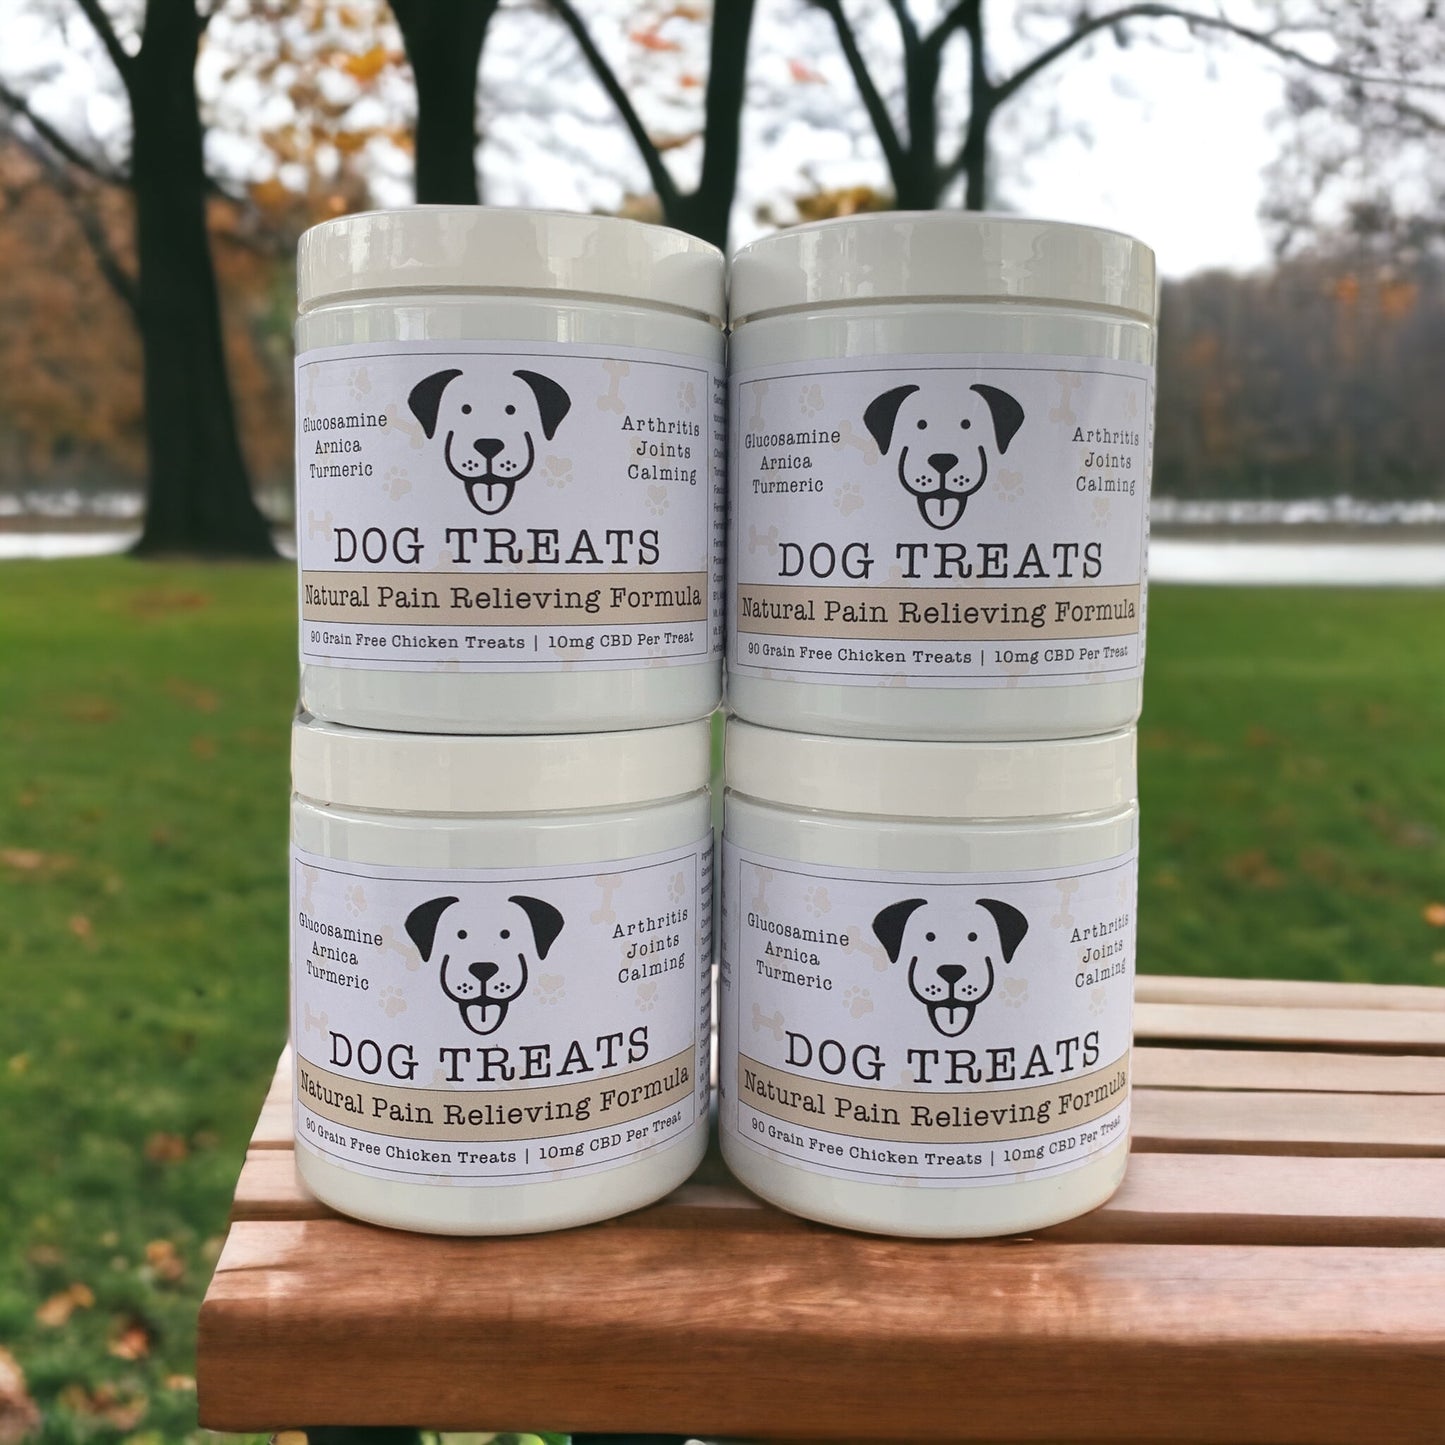 natural cbd dog treats with glucomasine, arnica, chondroitin for pain and inflammation